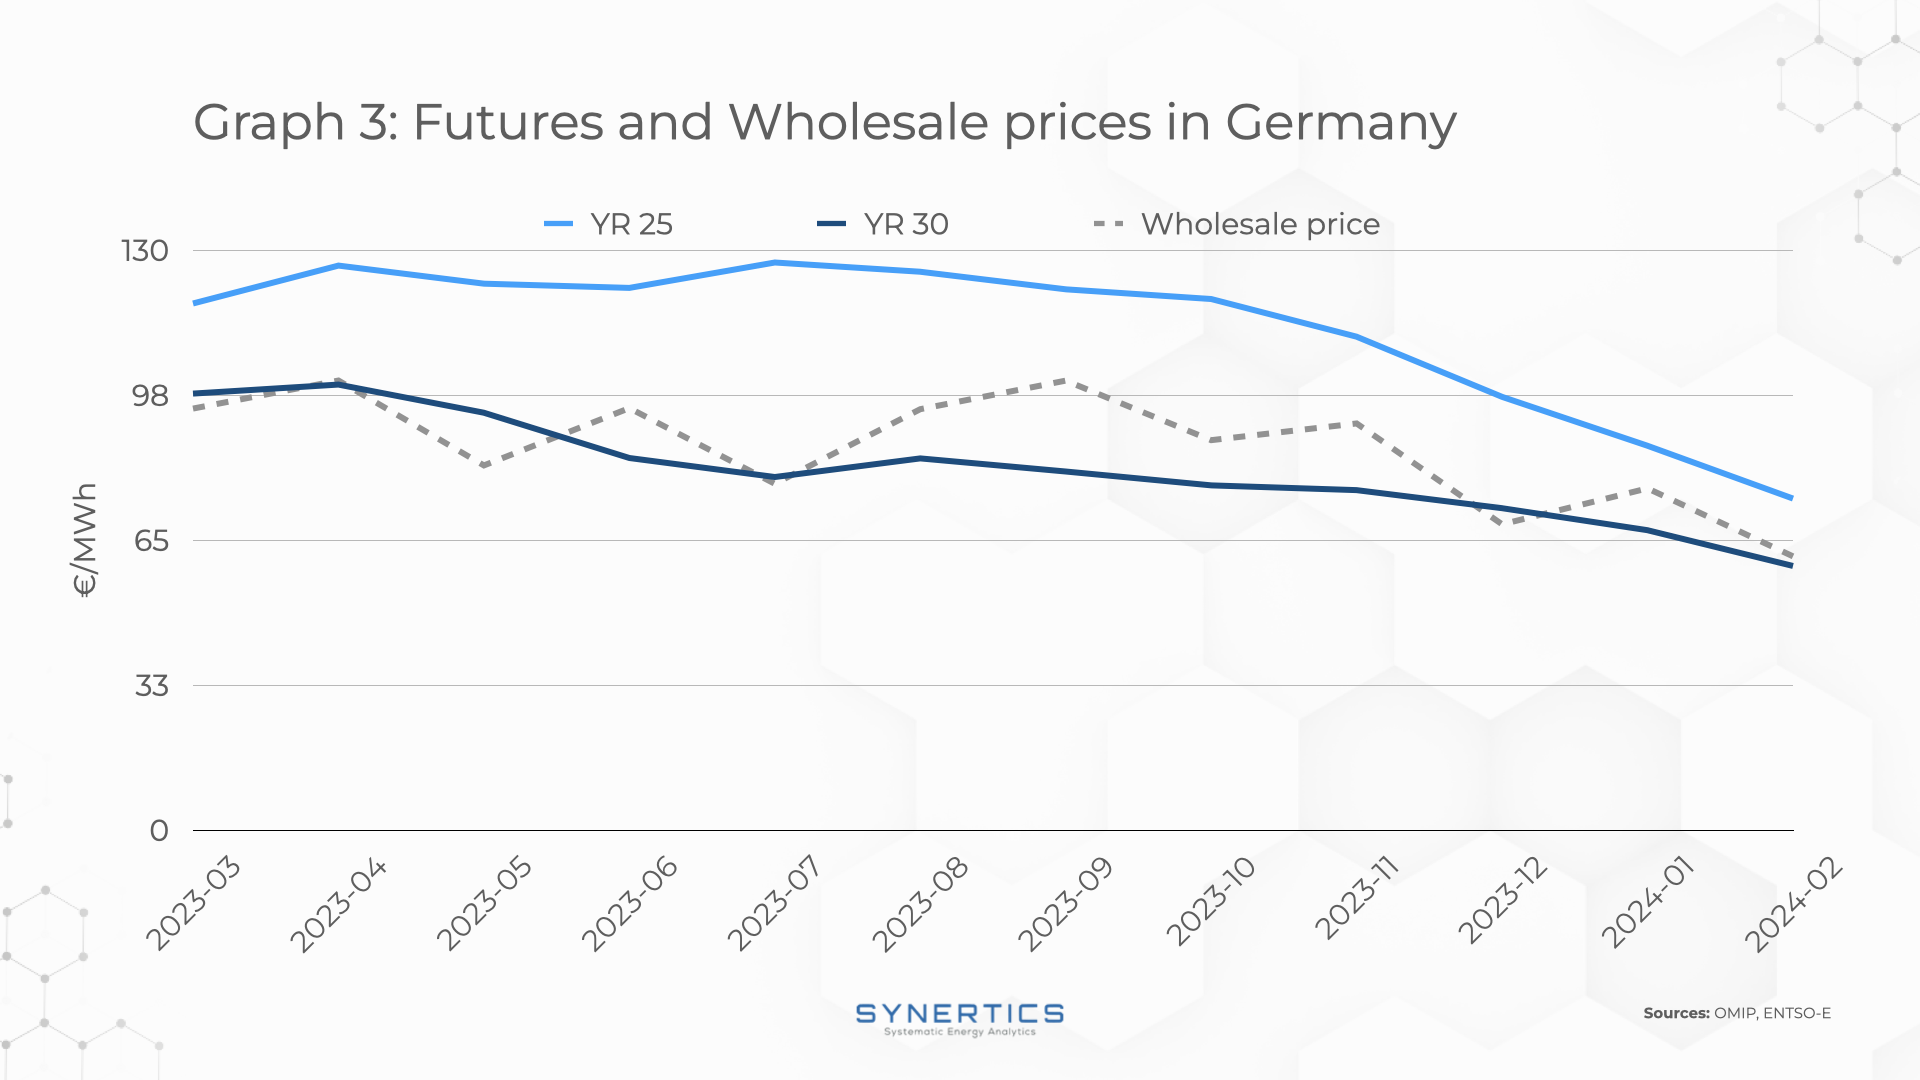 Futures and Wholesale prices in Germany